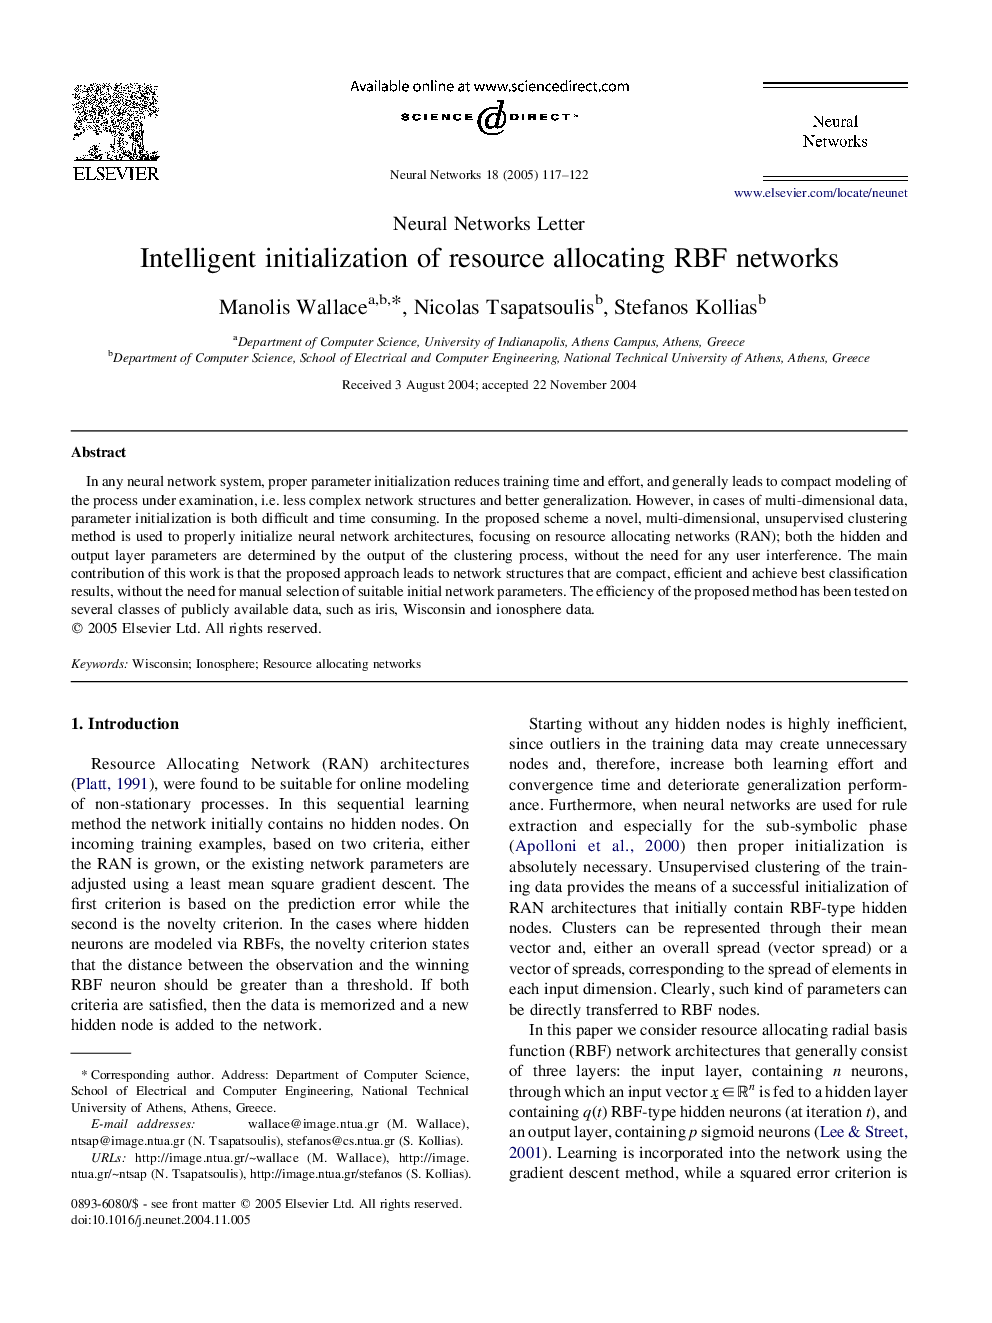 Intelligent initialization of resource allocating RBF networks